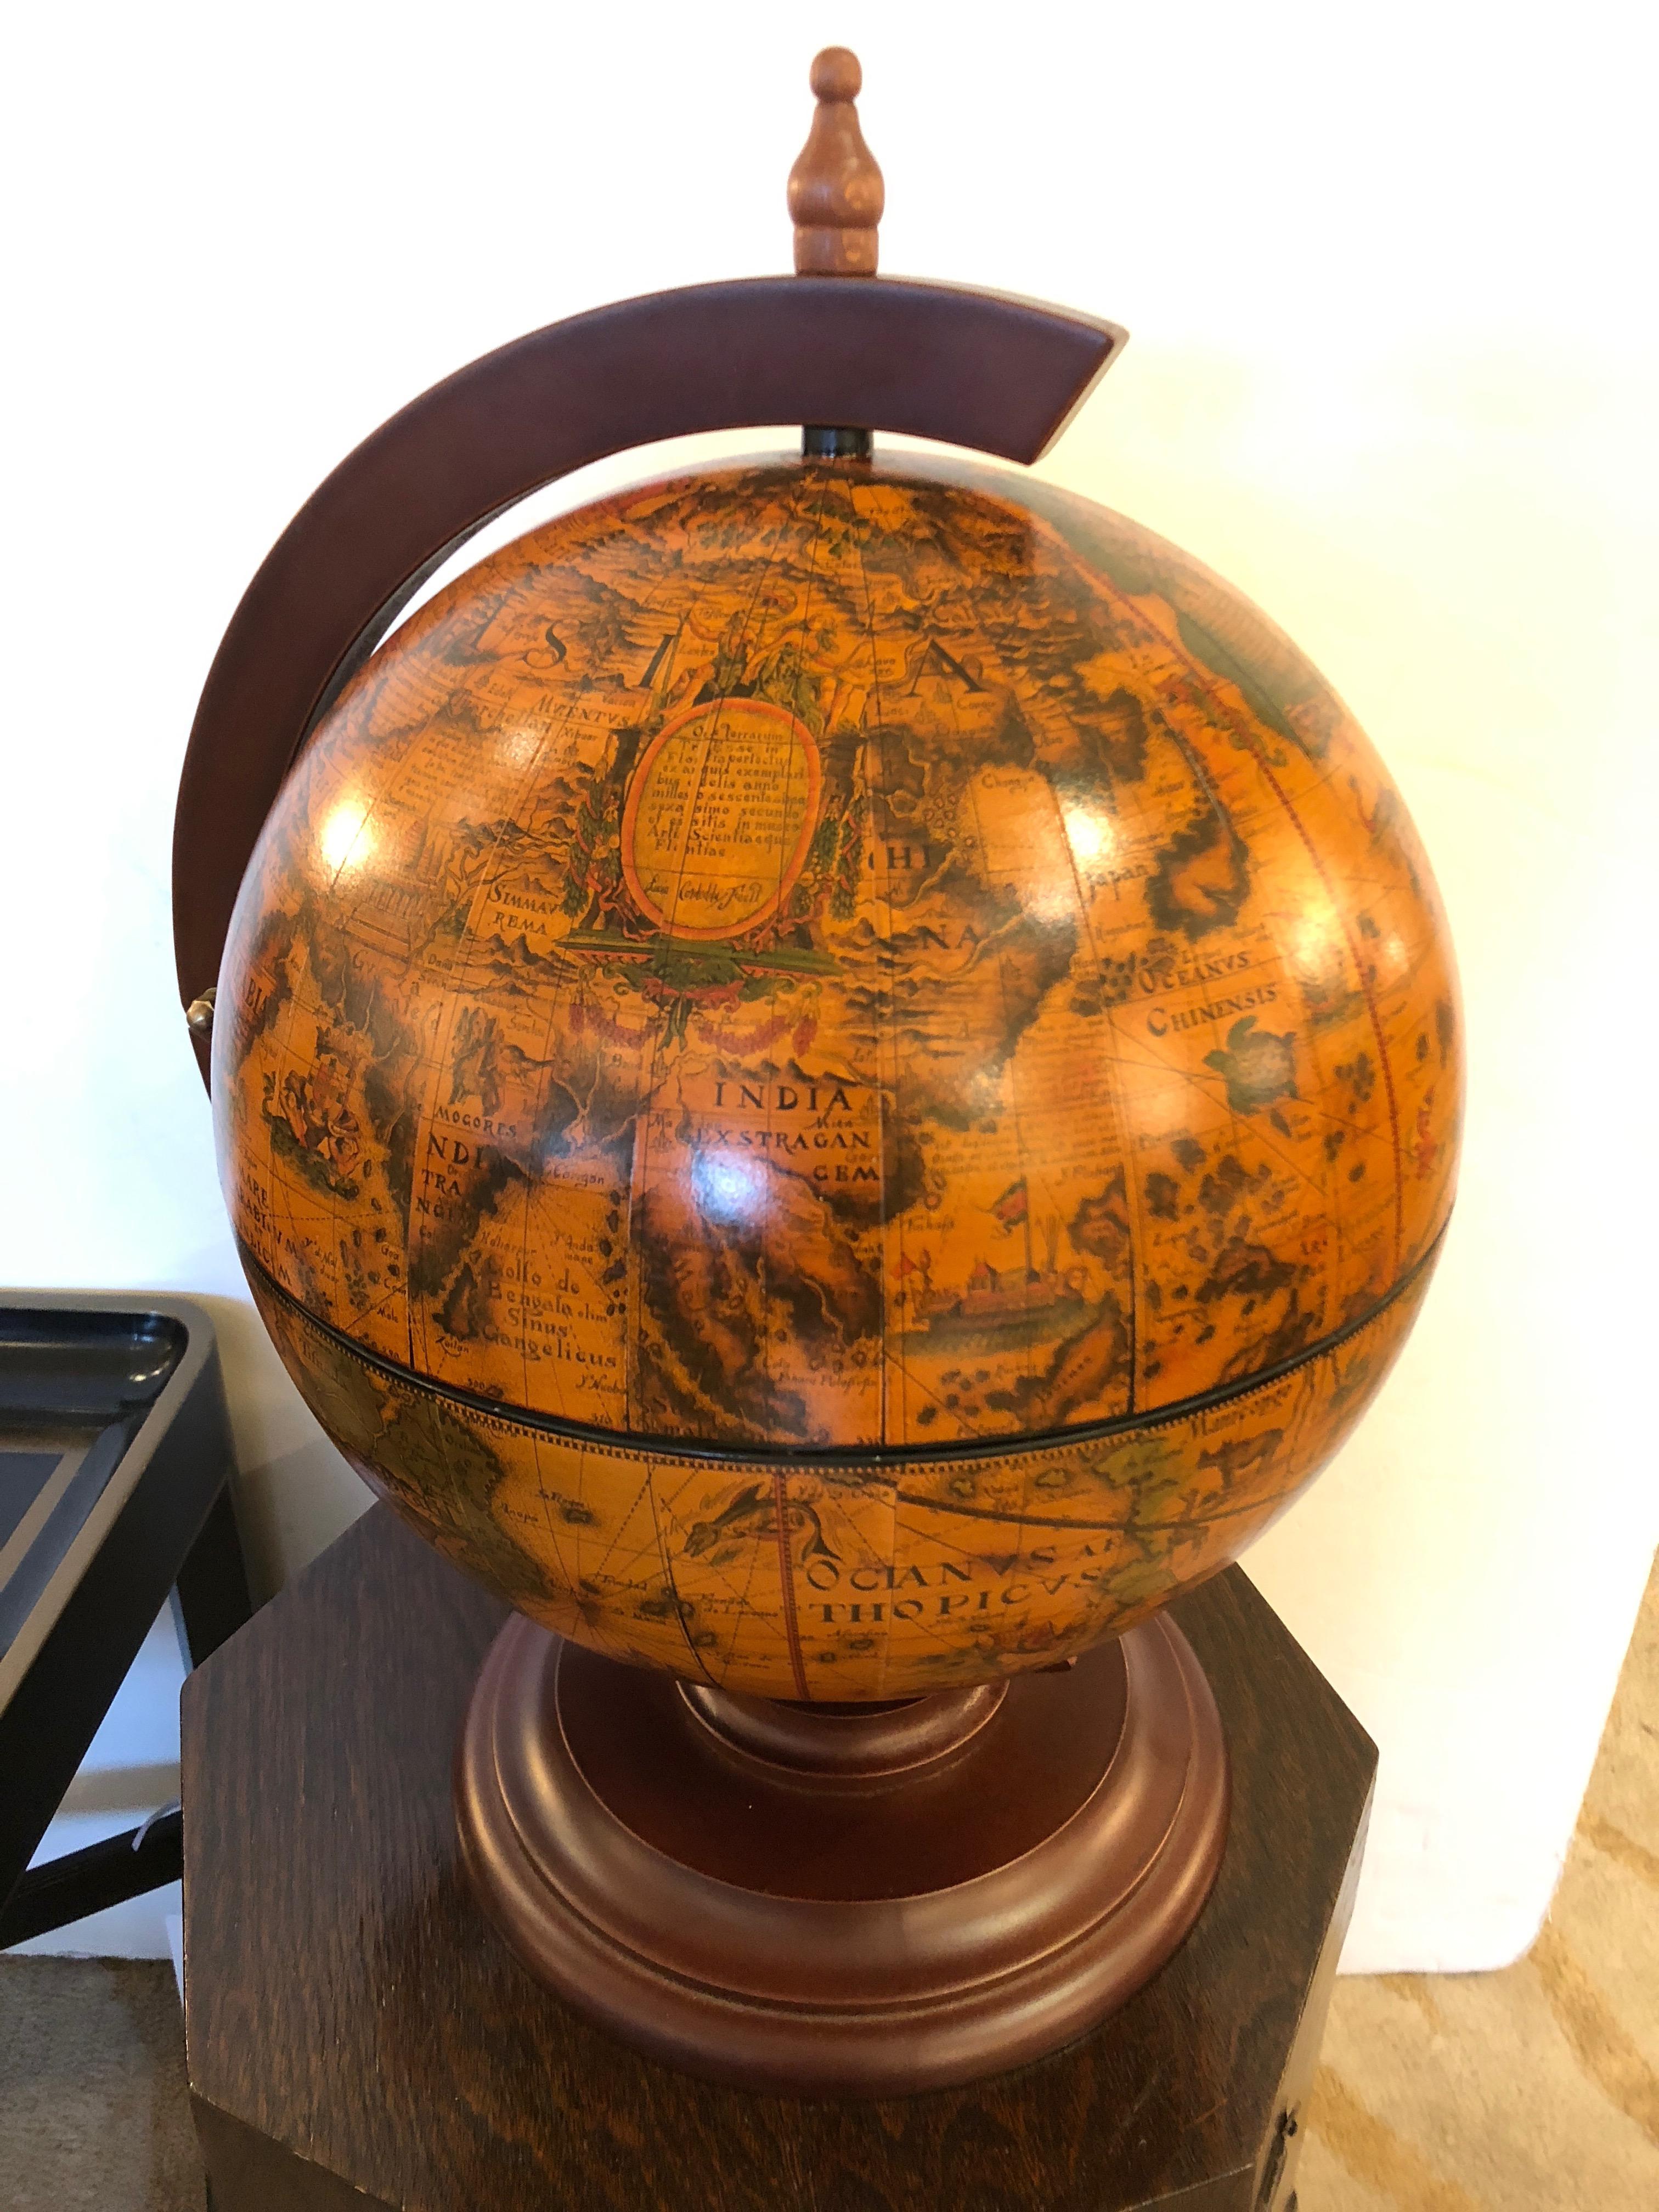 A gorgeous globe in warm browns, gold, green, orange and black, that opens to reveal a roulette game inside.